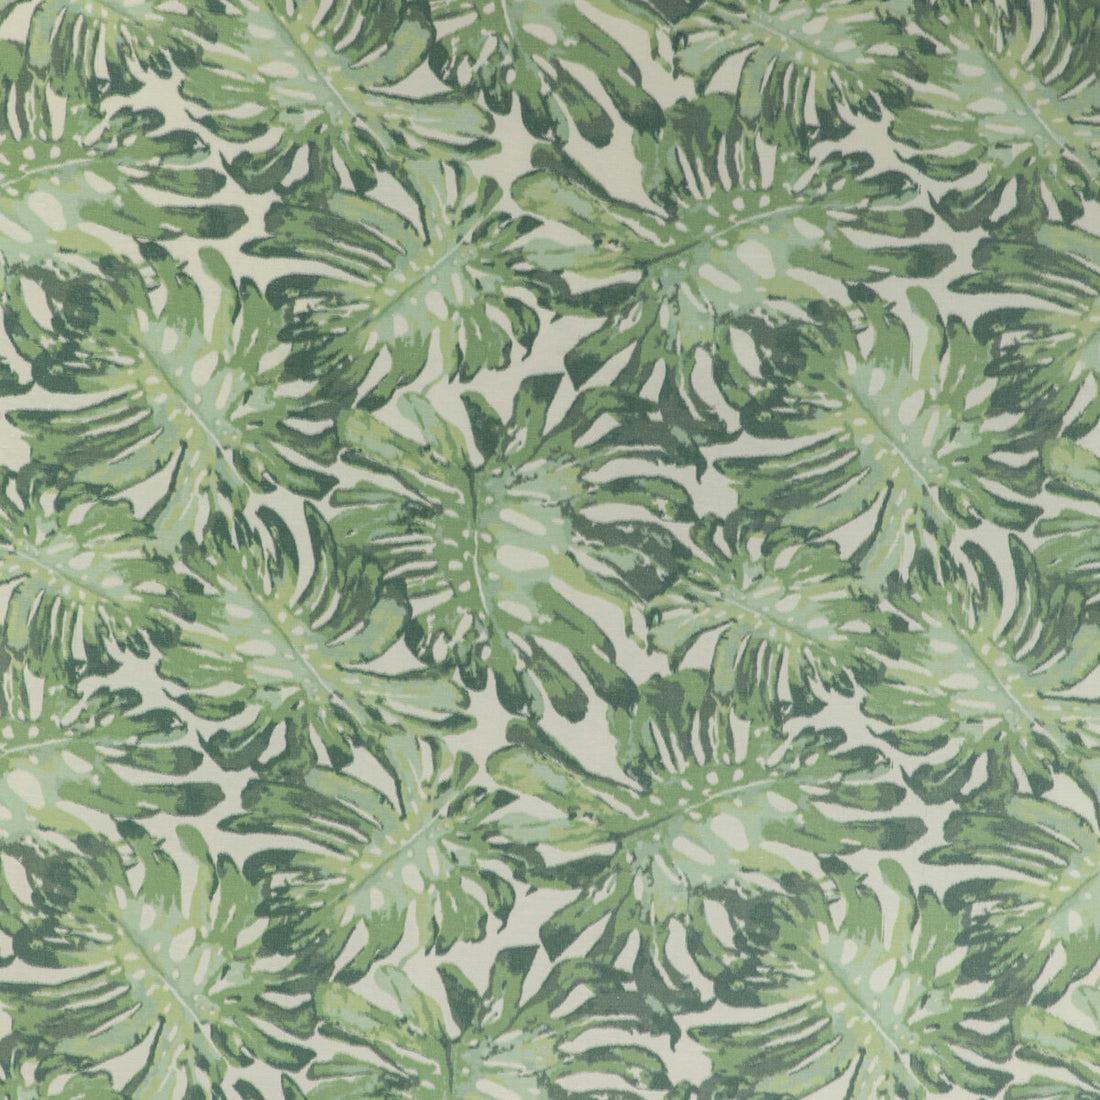 Calapan Print fabric in green color - pattern 2020199.230.0 - by Lee Jofa in the Mindoro collection